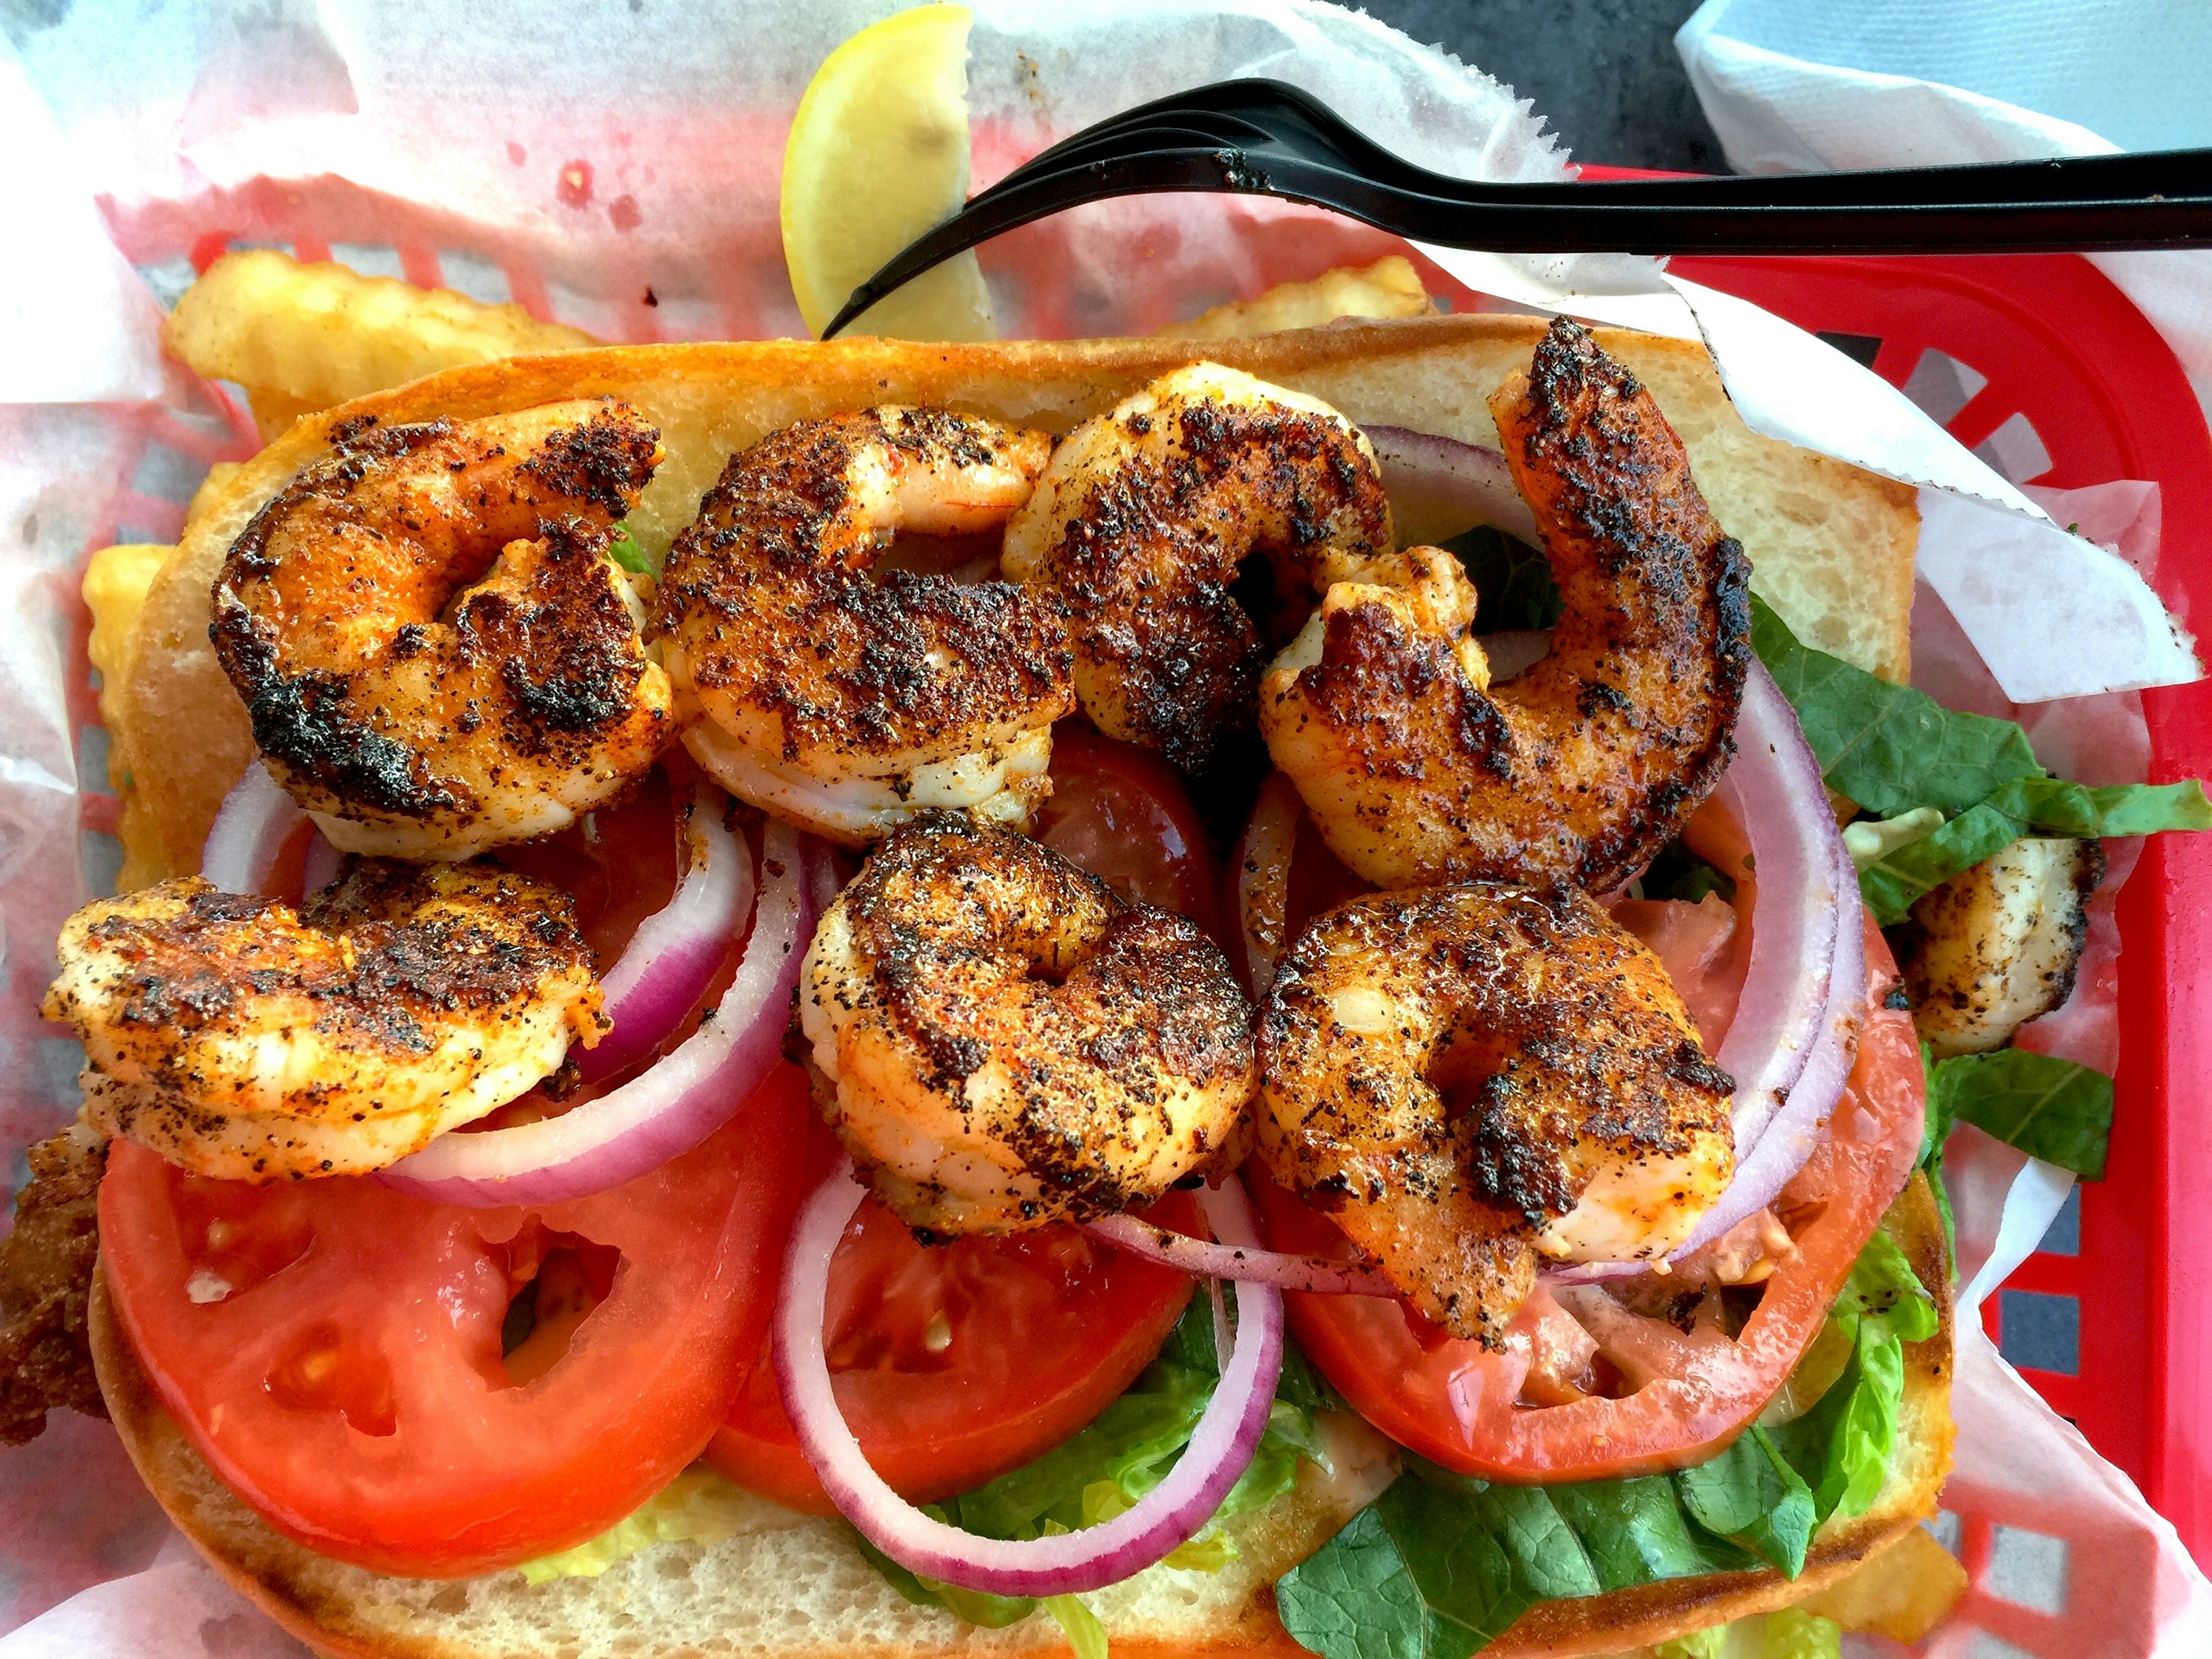 Grilled shrimp is placed on top of onions, tomato and lettuce to create an open-face sandwich. There are french fries under the sandwich and a black plastic fork resting on the red tray.